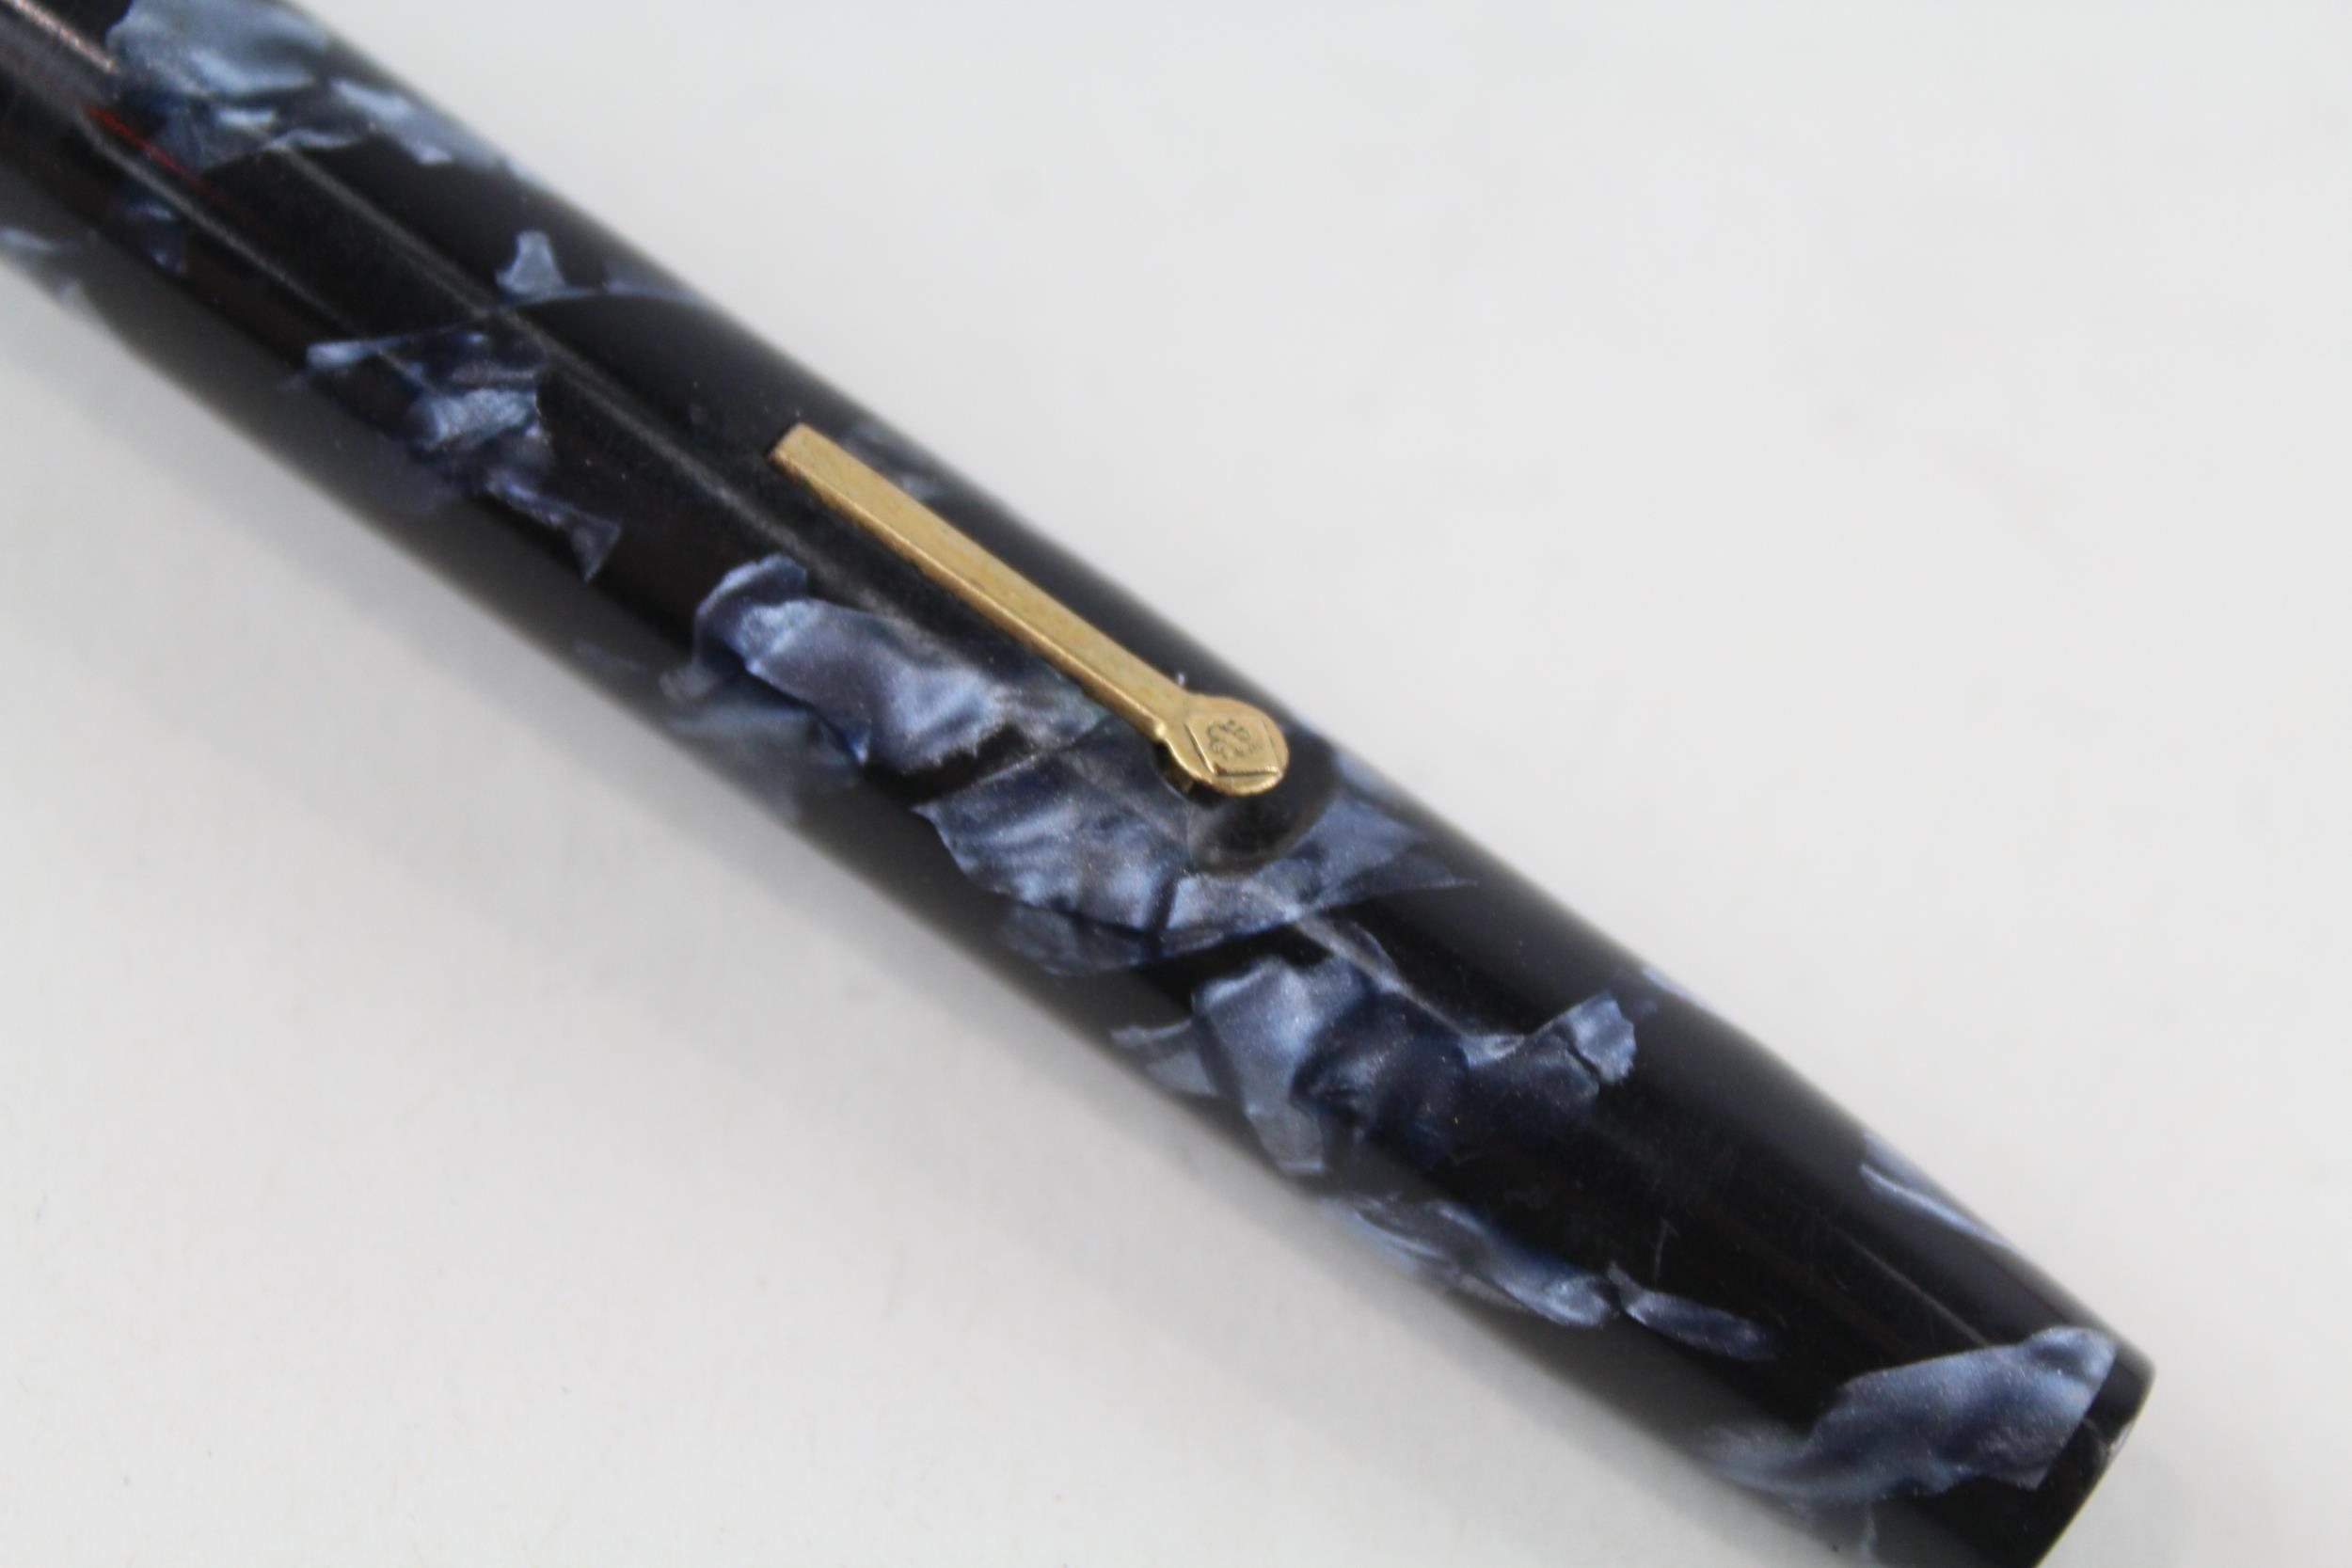 Vintage CONWAY STEWART No.55 Navy Cased Fountain Pen w/ 14ct Gold Nib WRITING - Dip Tested & WRITING - Image 4 of 4